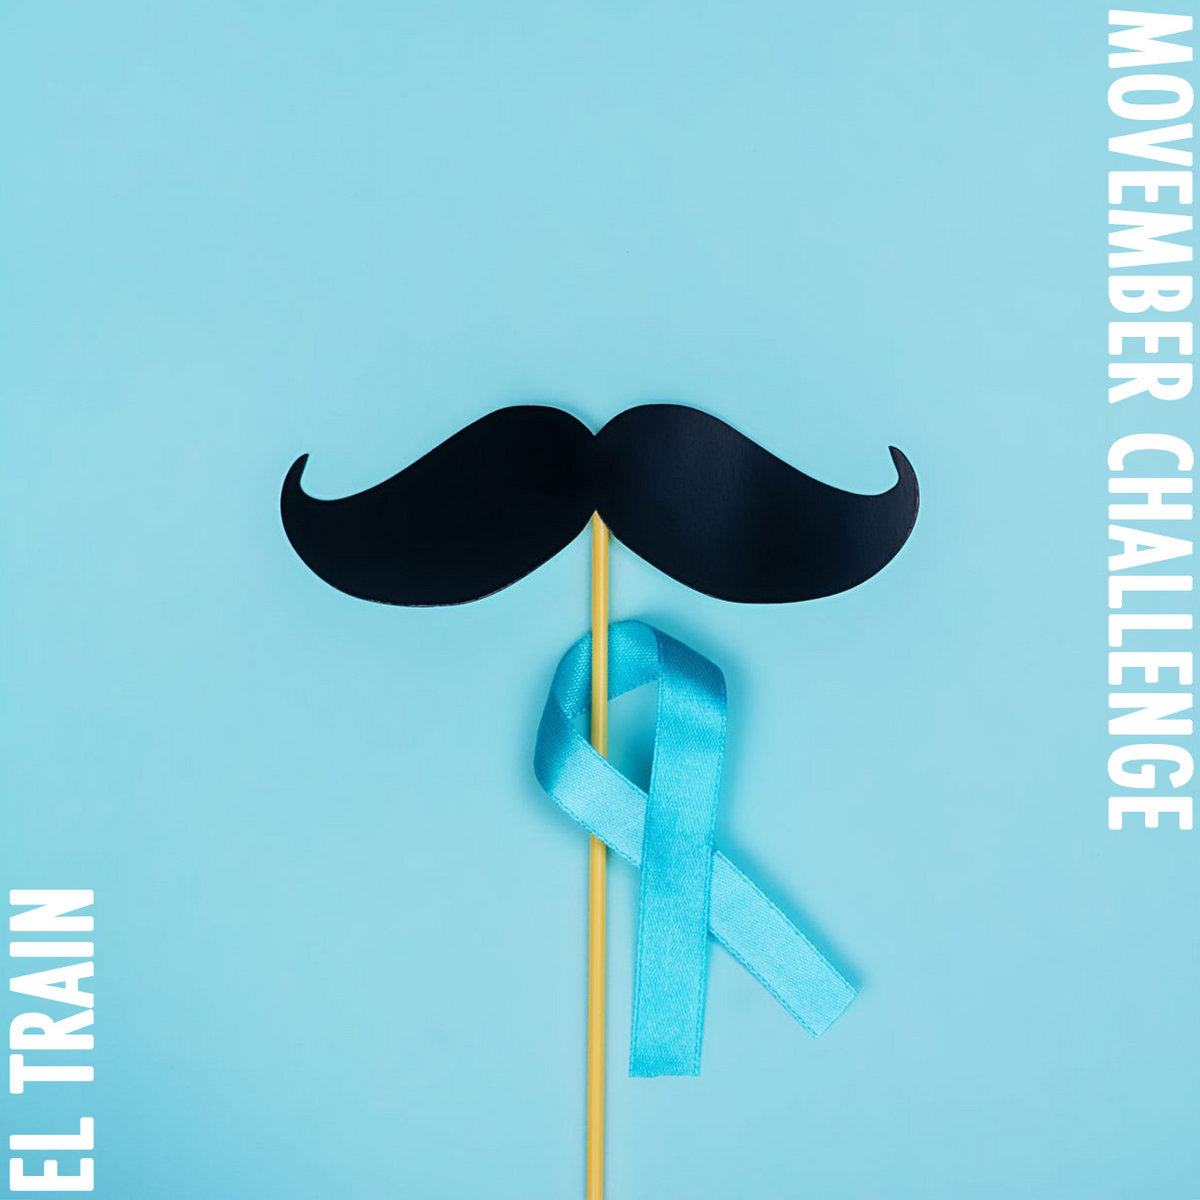 El. Train dropped a song a day for "Movember Challenge - 2020"